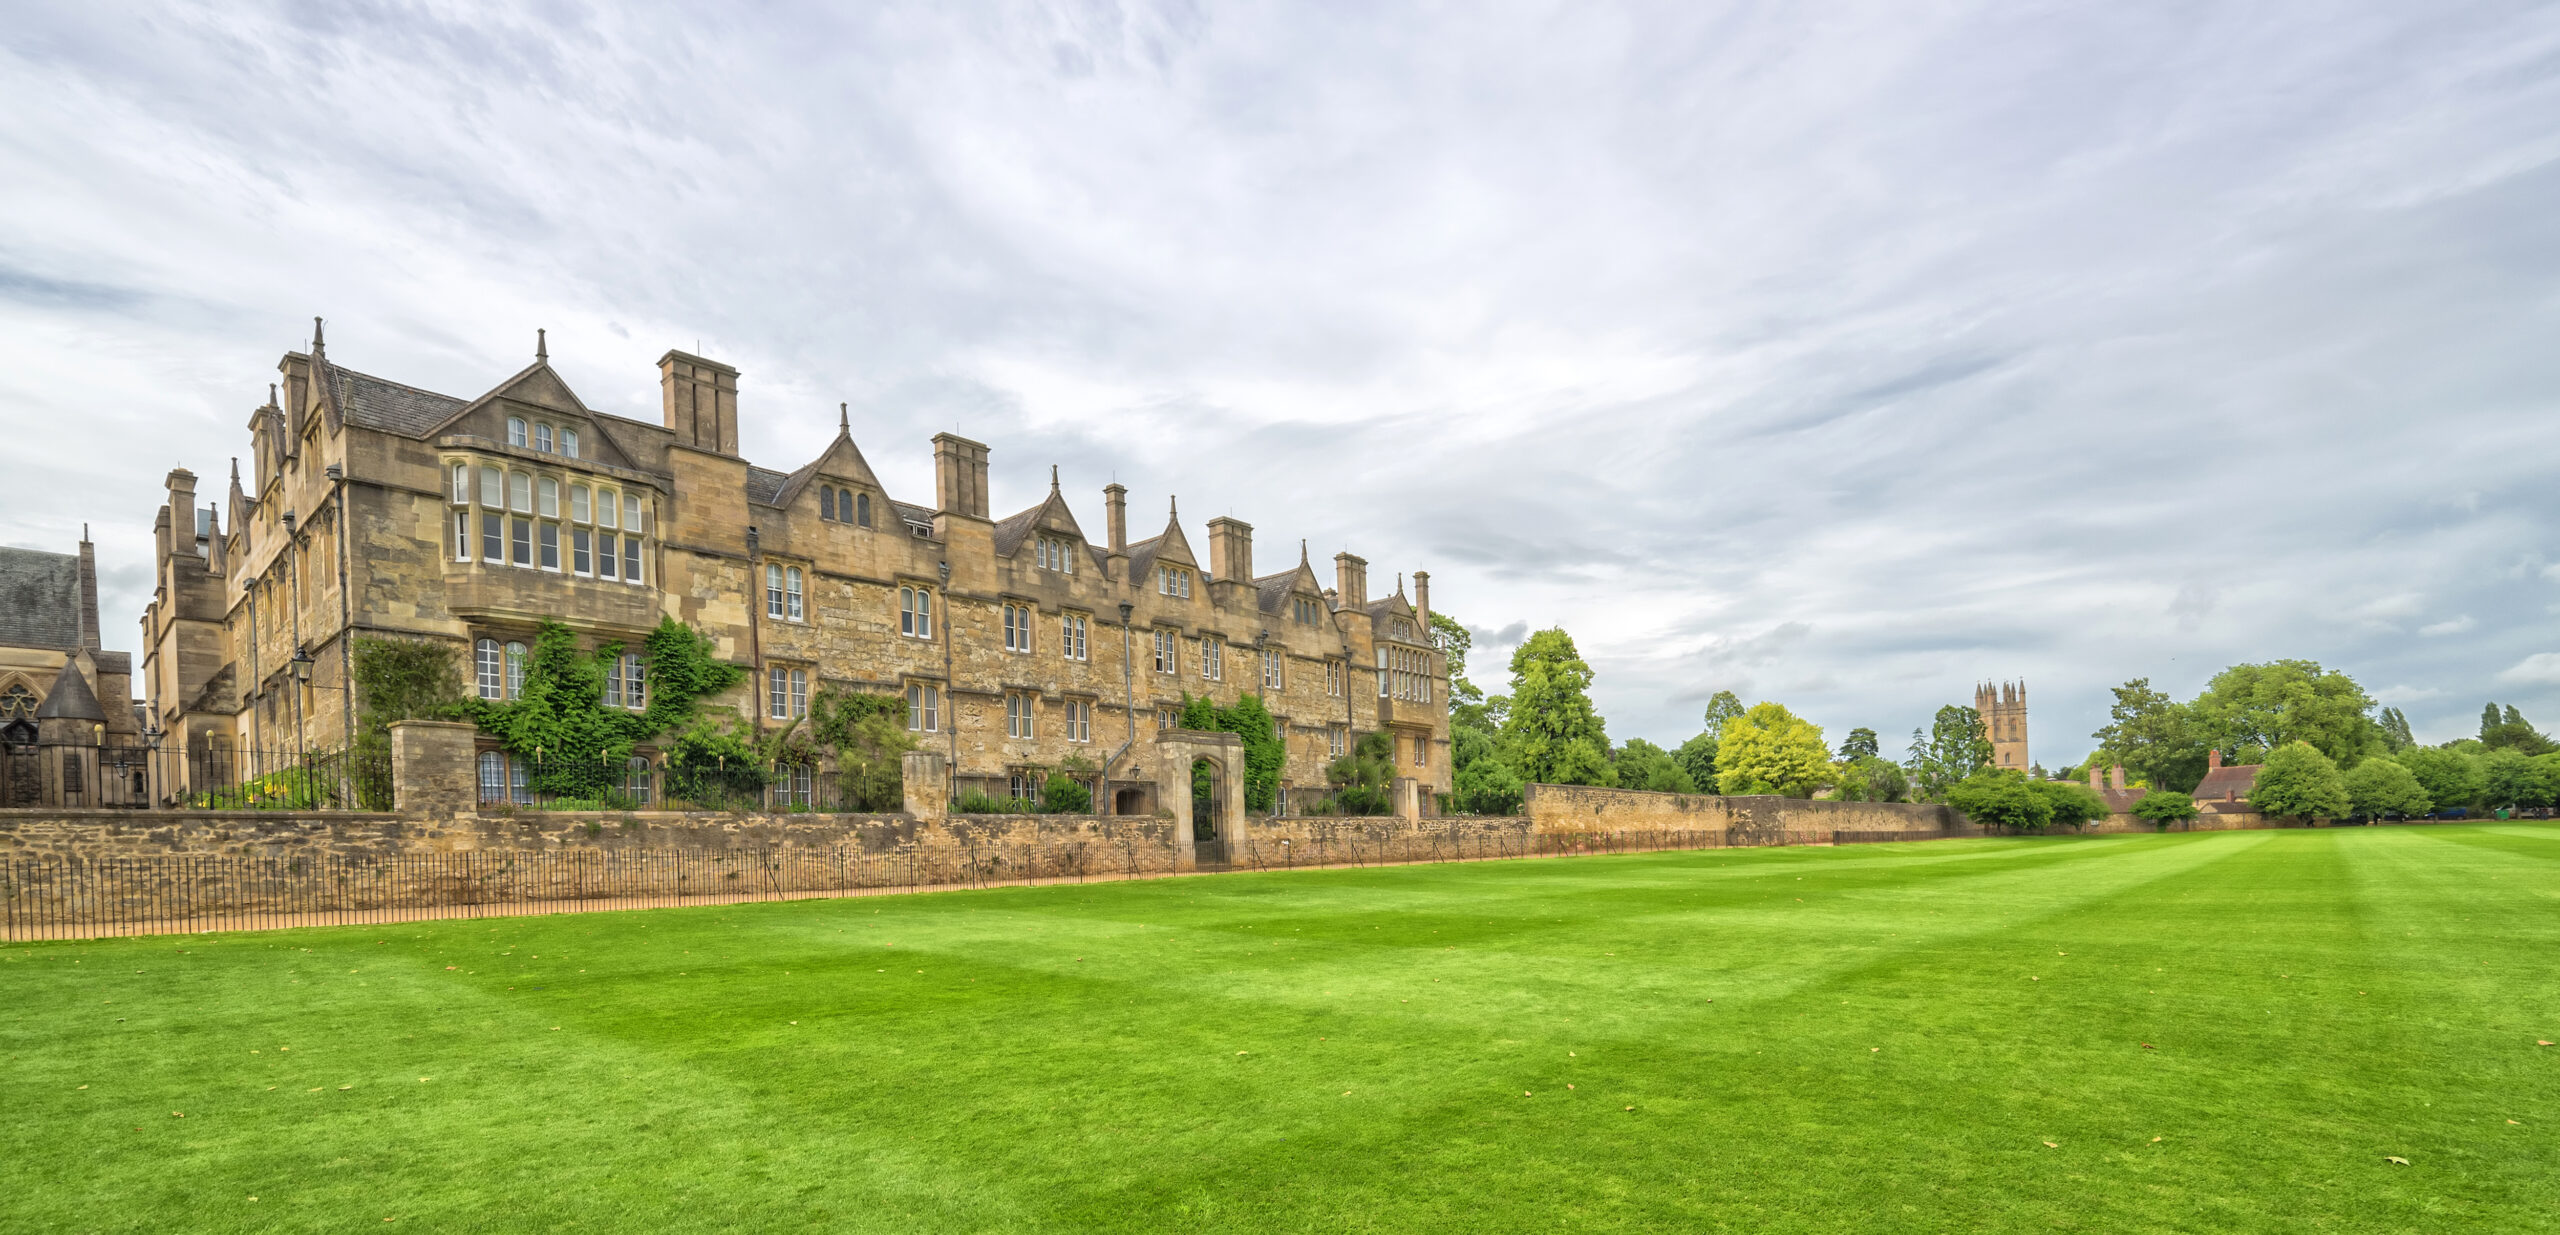 Merton College in cloudy summer scenery